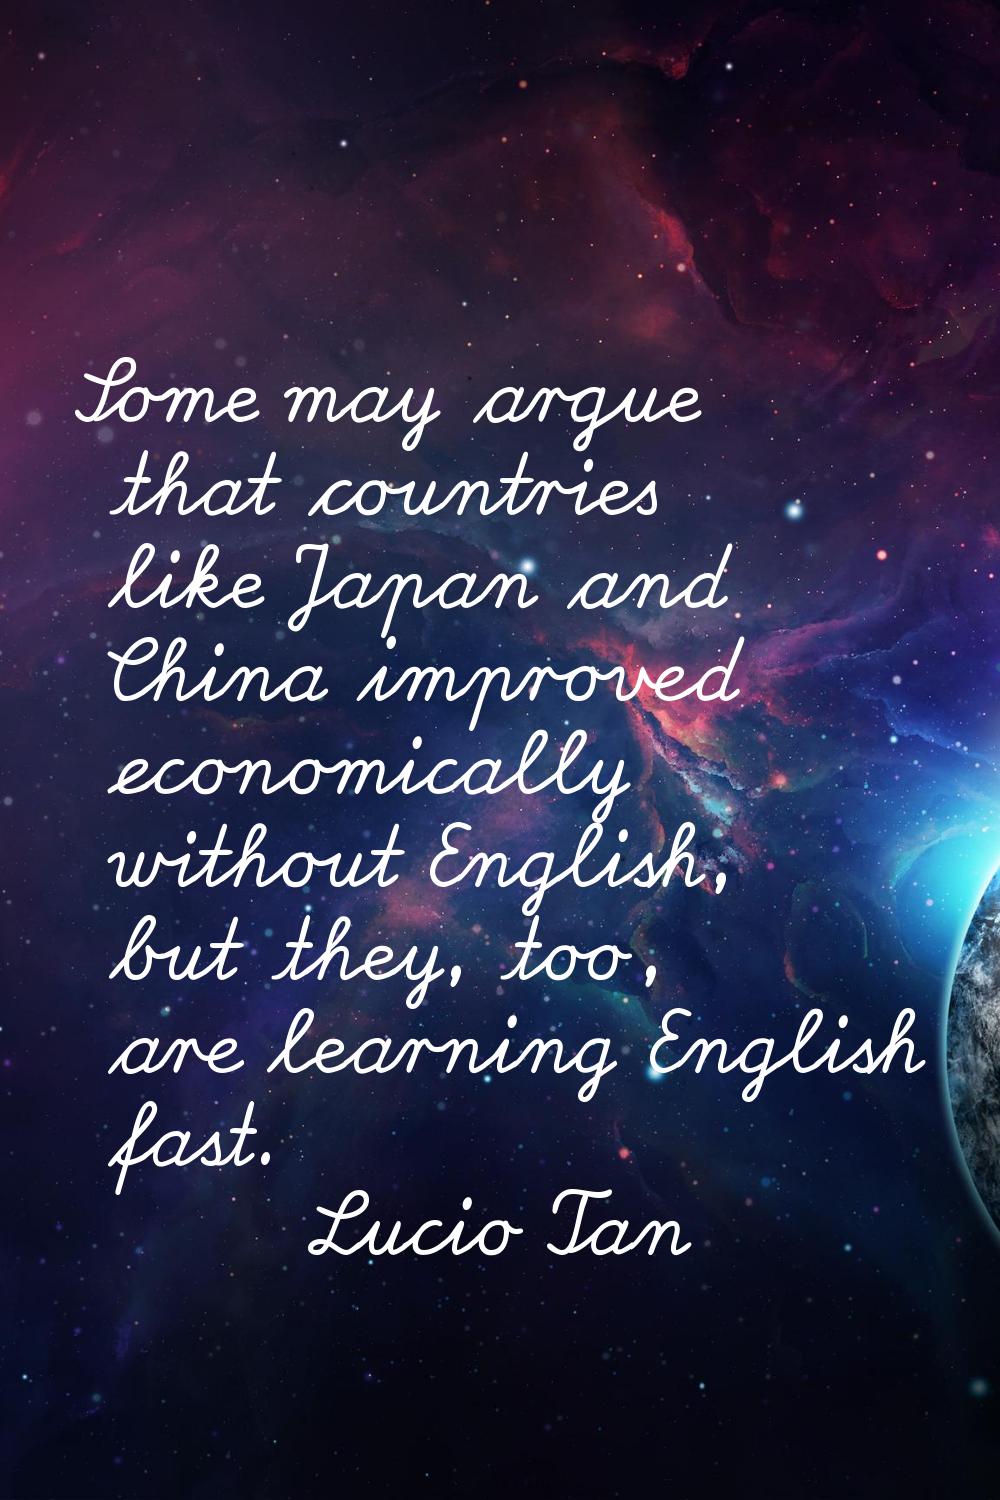 Some may argue that countries like Japan and China improved economically without English, but they,